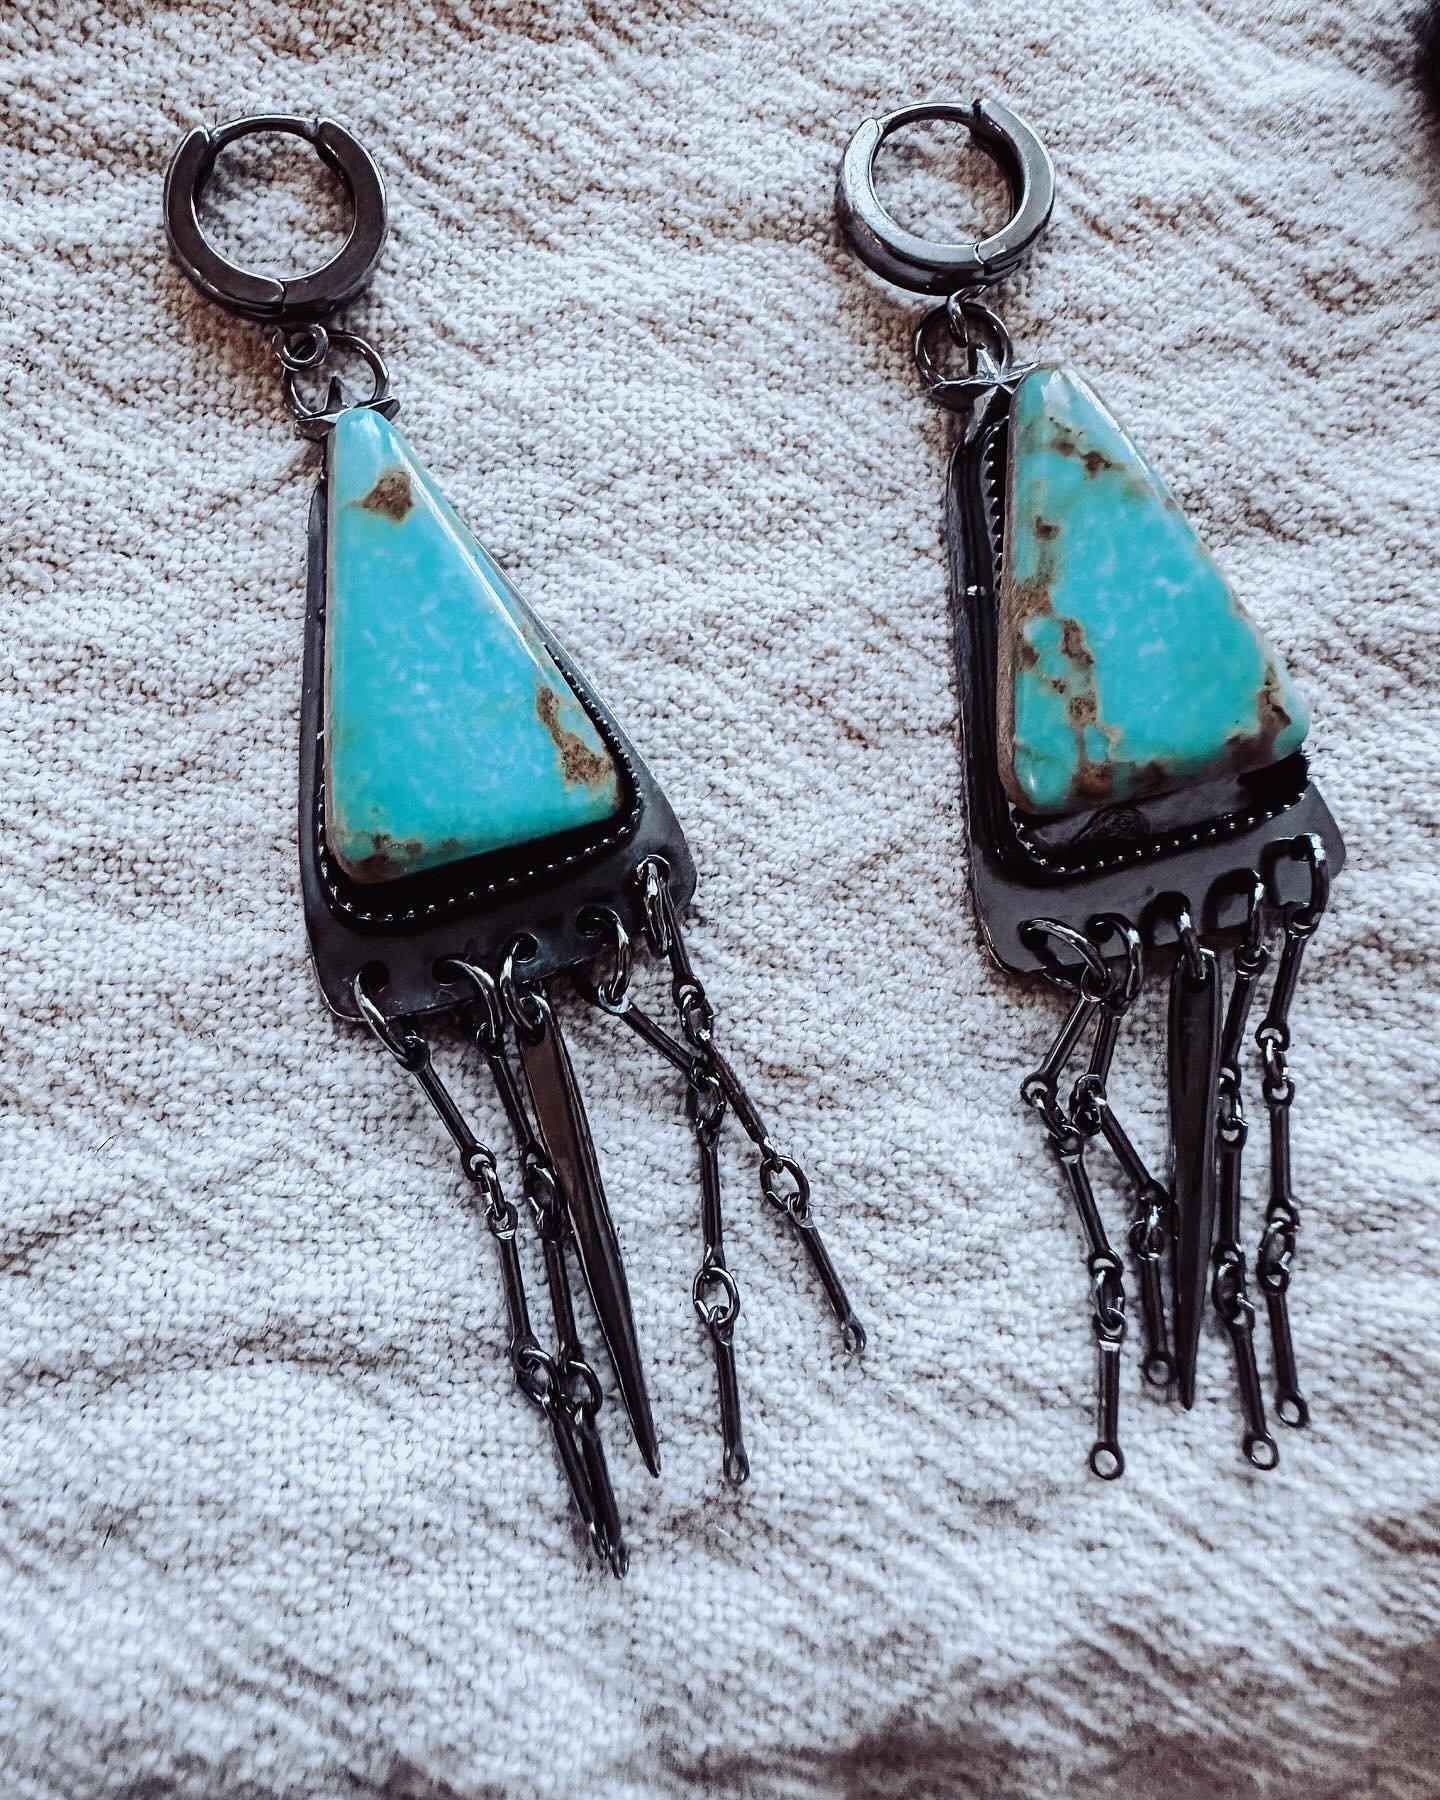 Working late in the studio to get these beauties finished. Should I keep the shiny black finish or give it a gentle polish? 
.
.
.
#kingmanturquoise #turquoiseearrings #fringeearrings #tampabayartist #silversmith